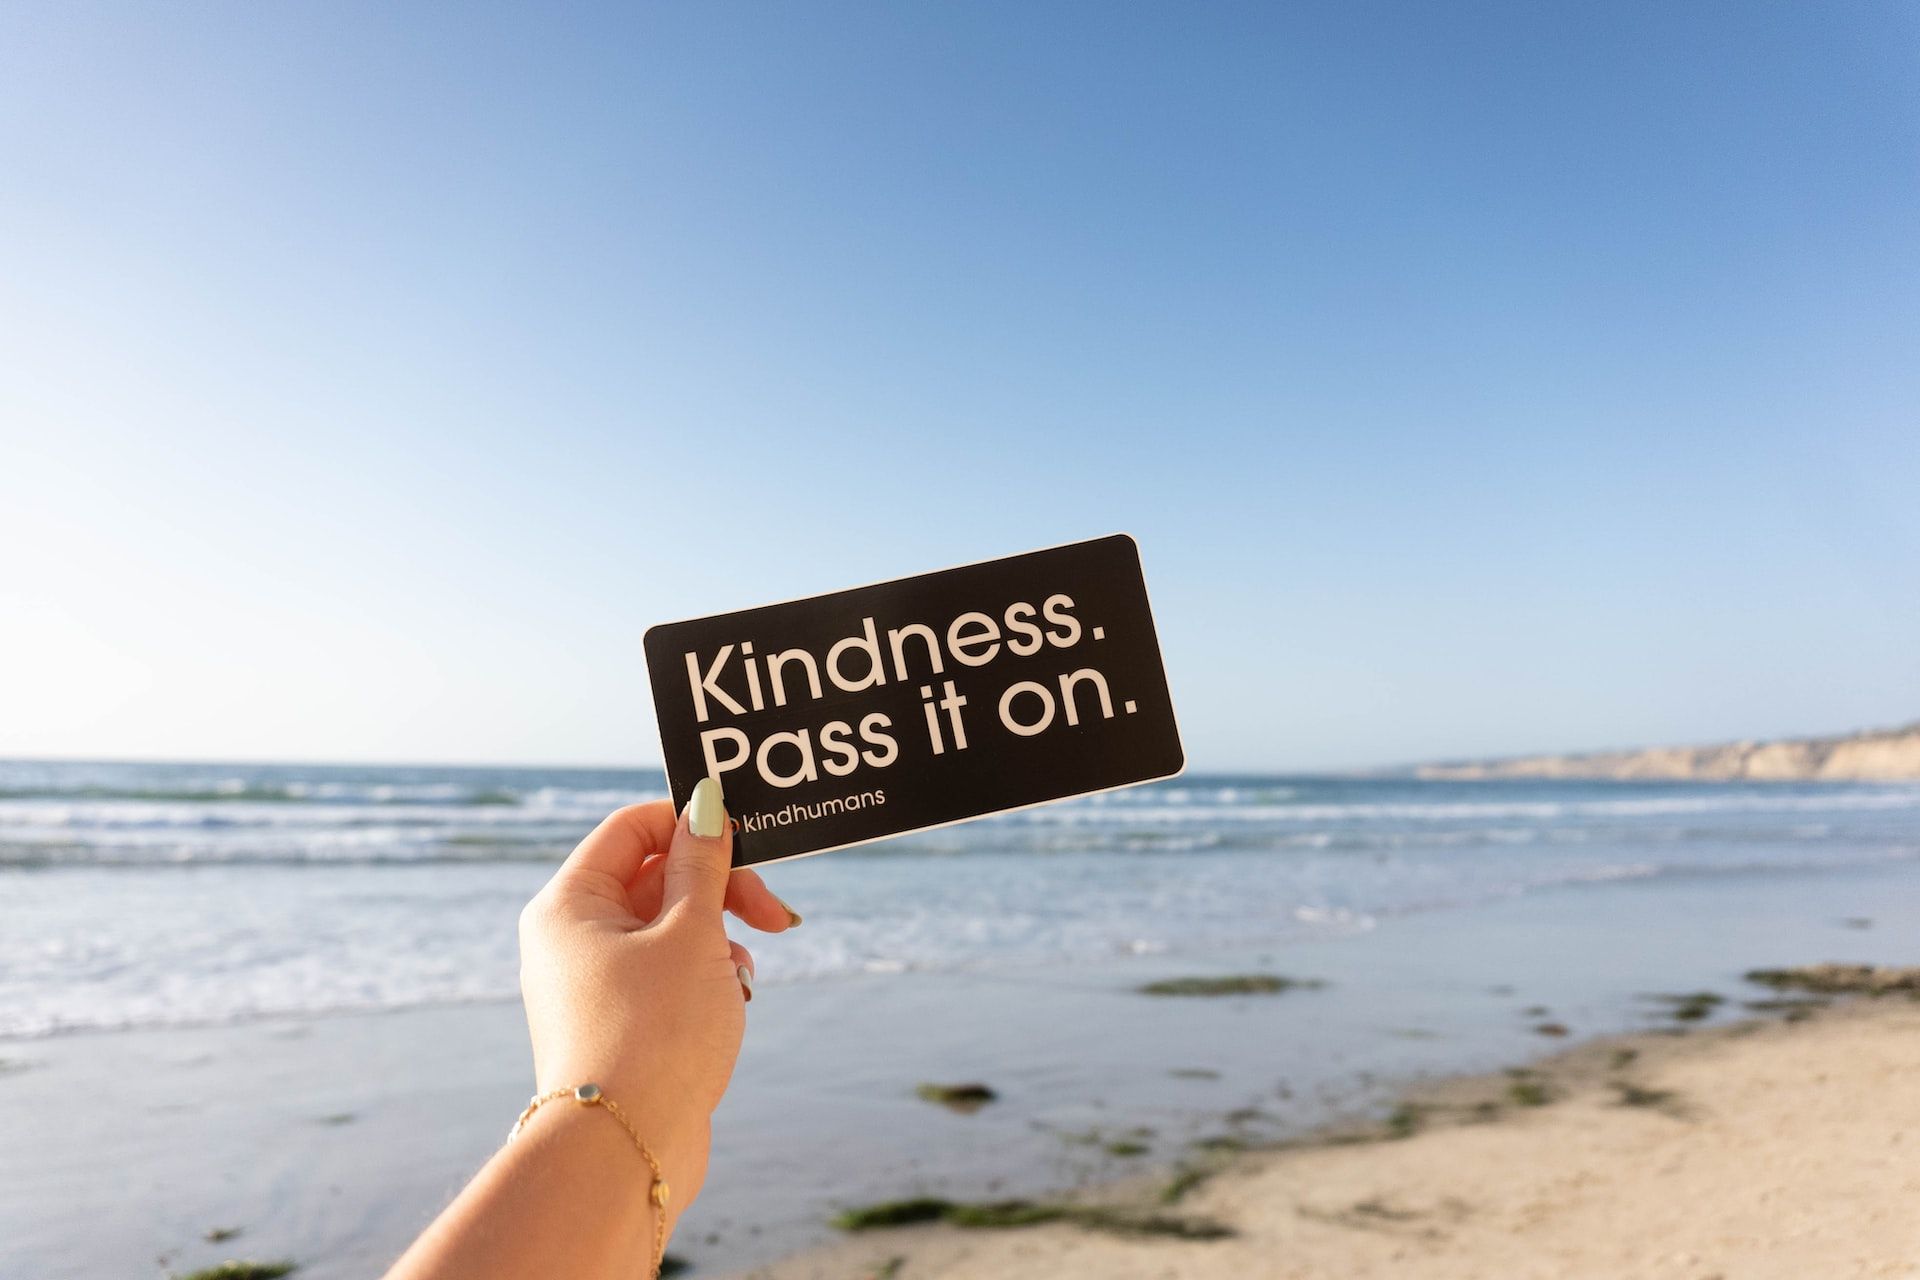 Person holding a sign saying 'kindness pass it on' in front of the ocean